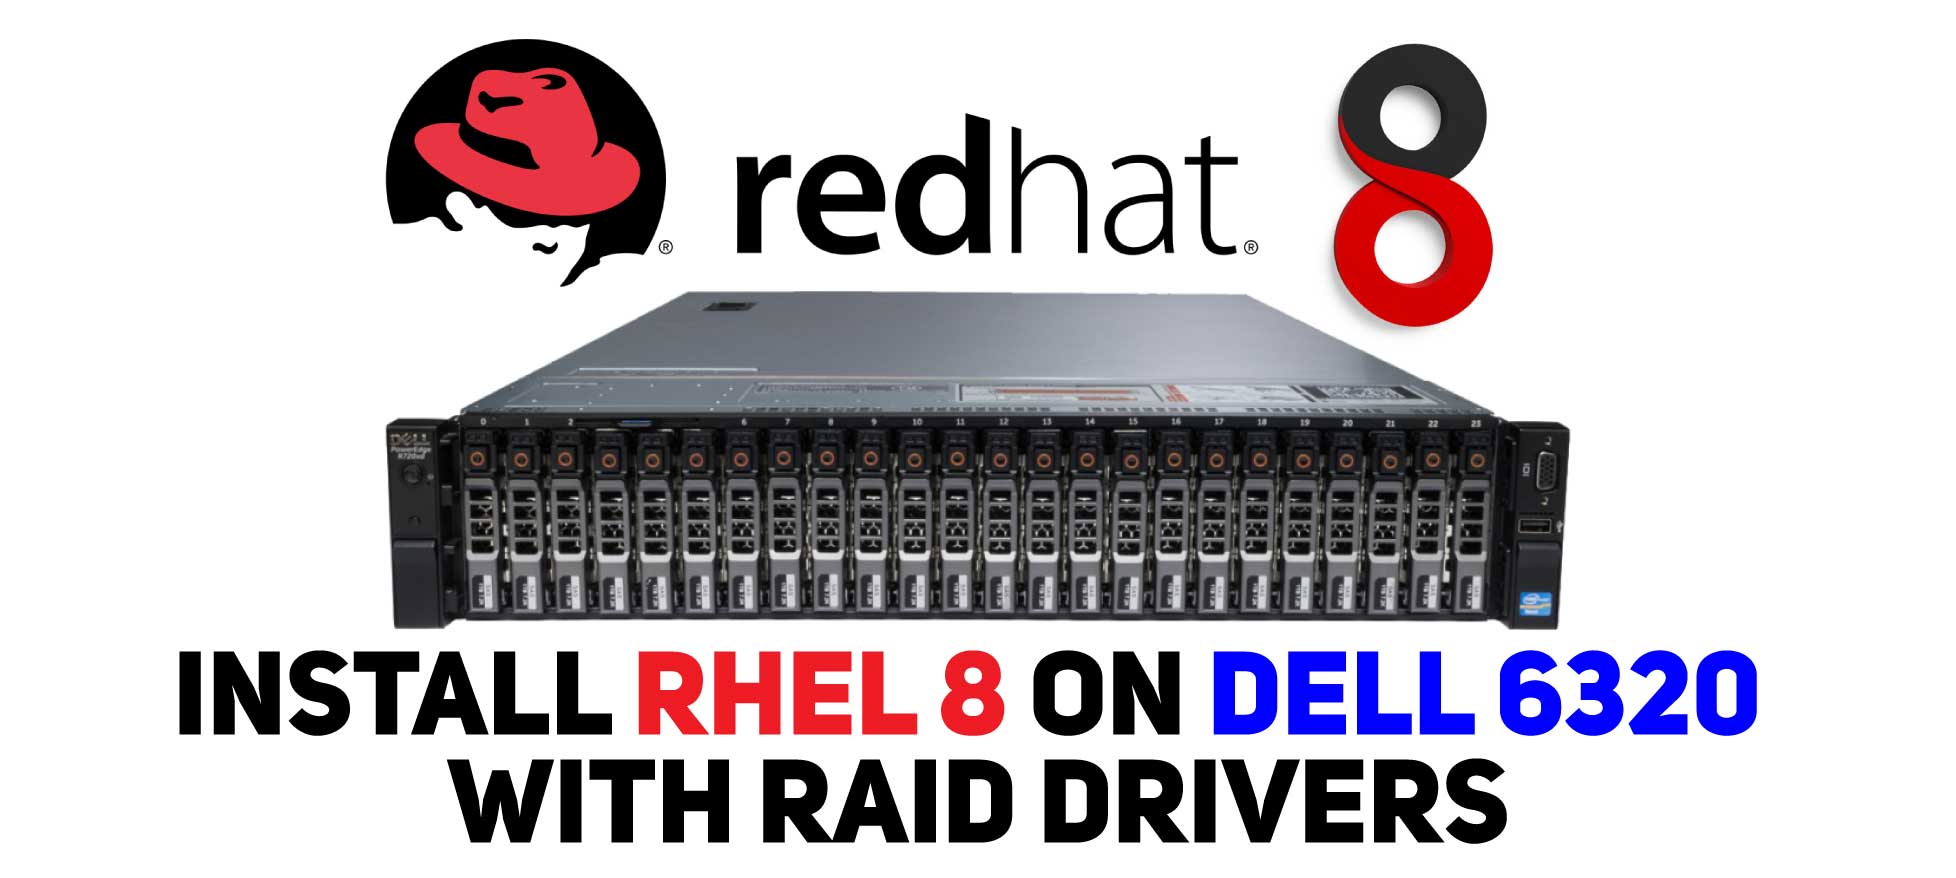 Red hat scsi & raid devices driver download for windows 10 64-bit